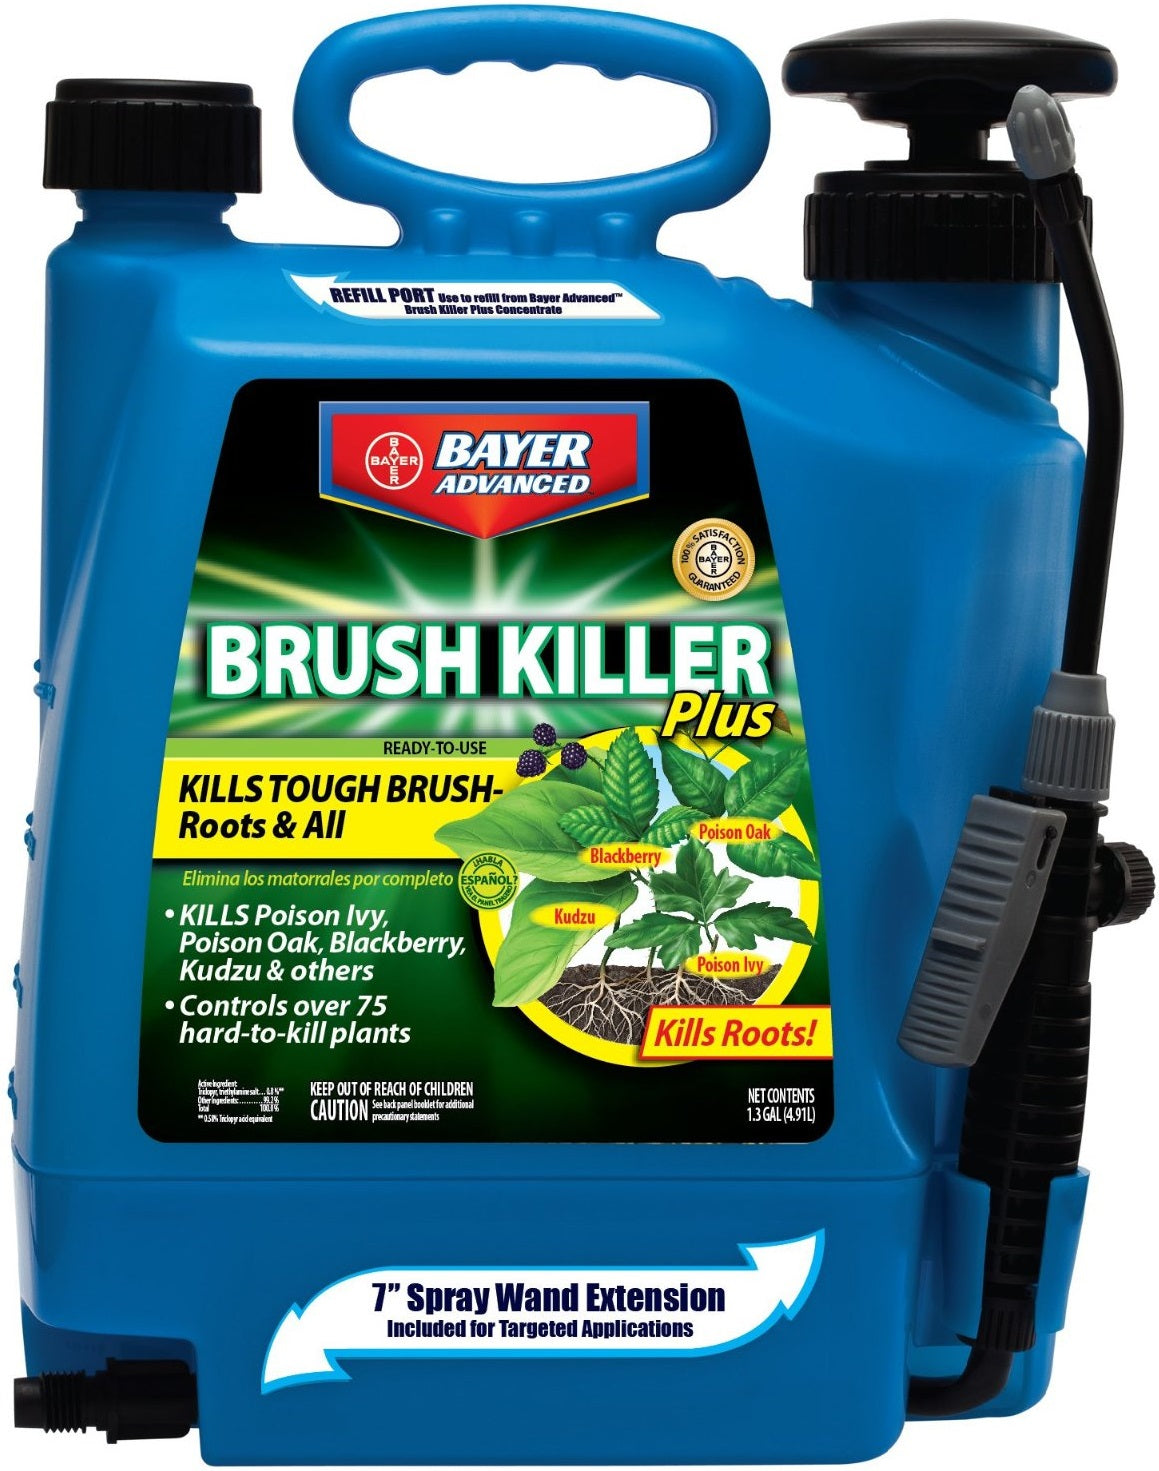 Buy bioadvance brush killer - Online store for lawn & plant care, brush killer in USA, on sale, low price, discount deals, coupon code